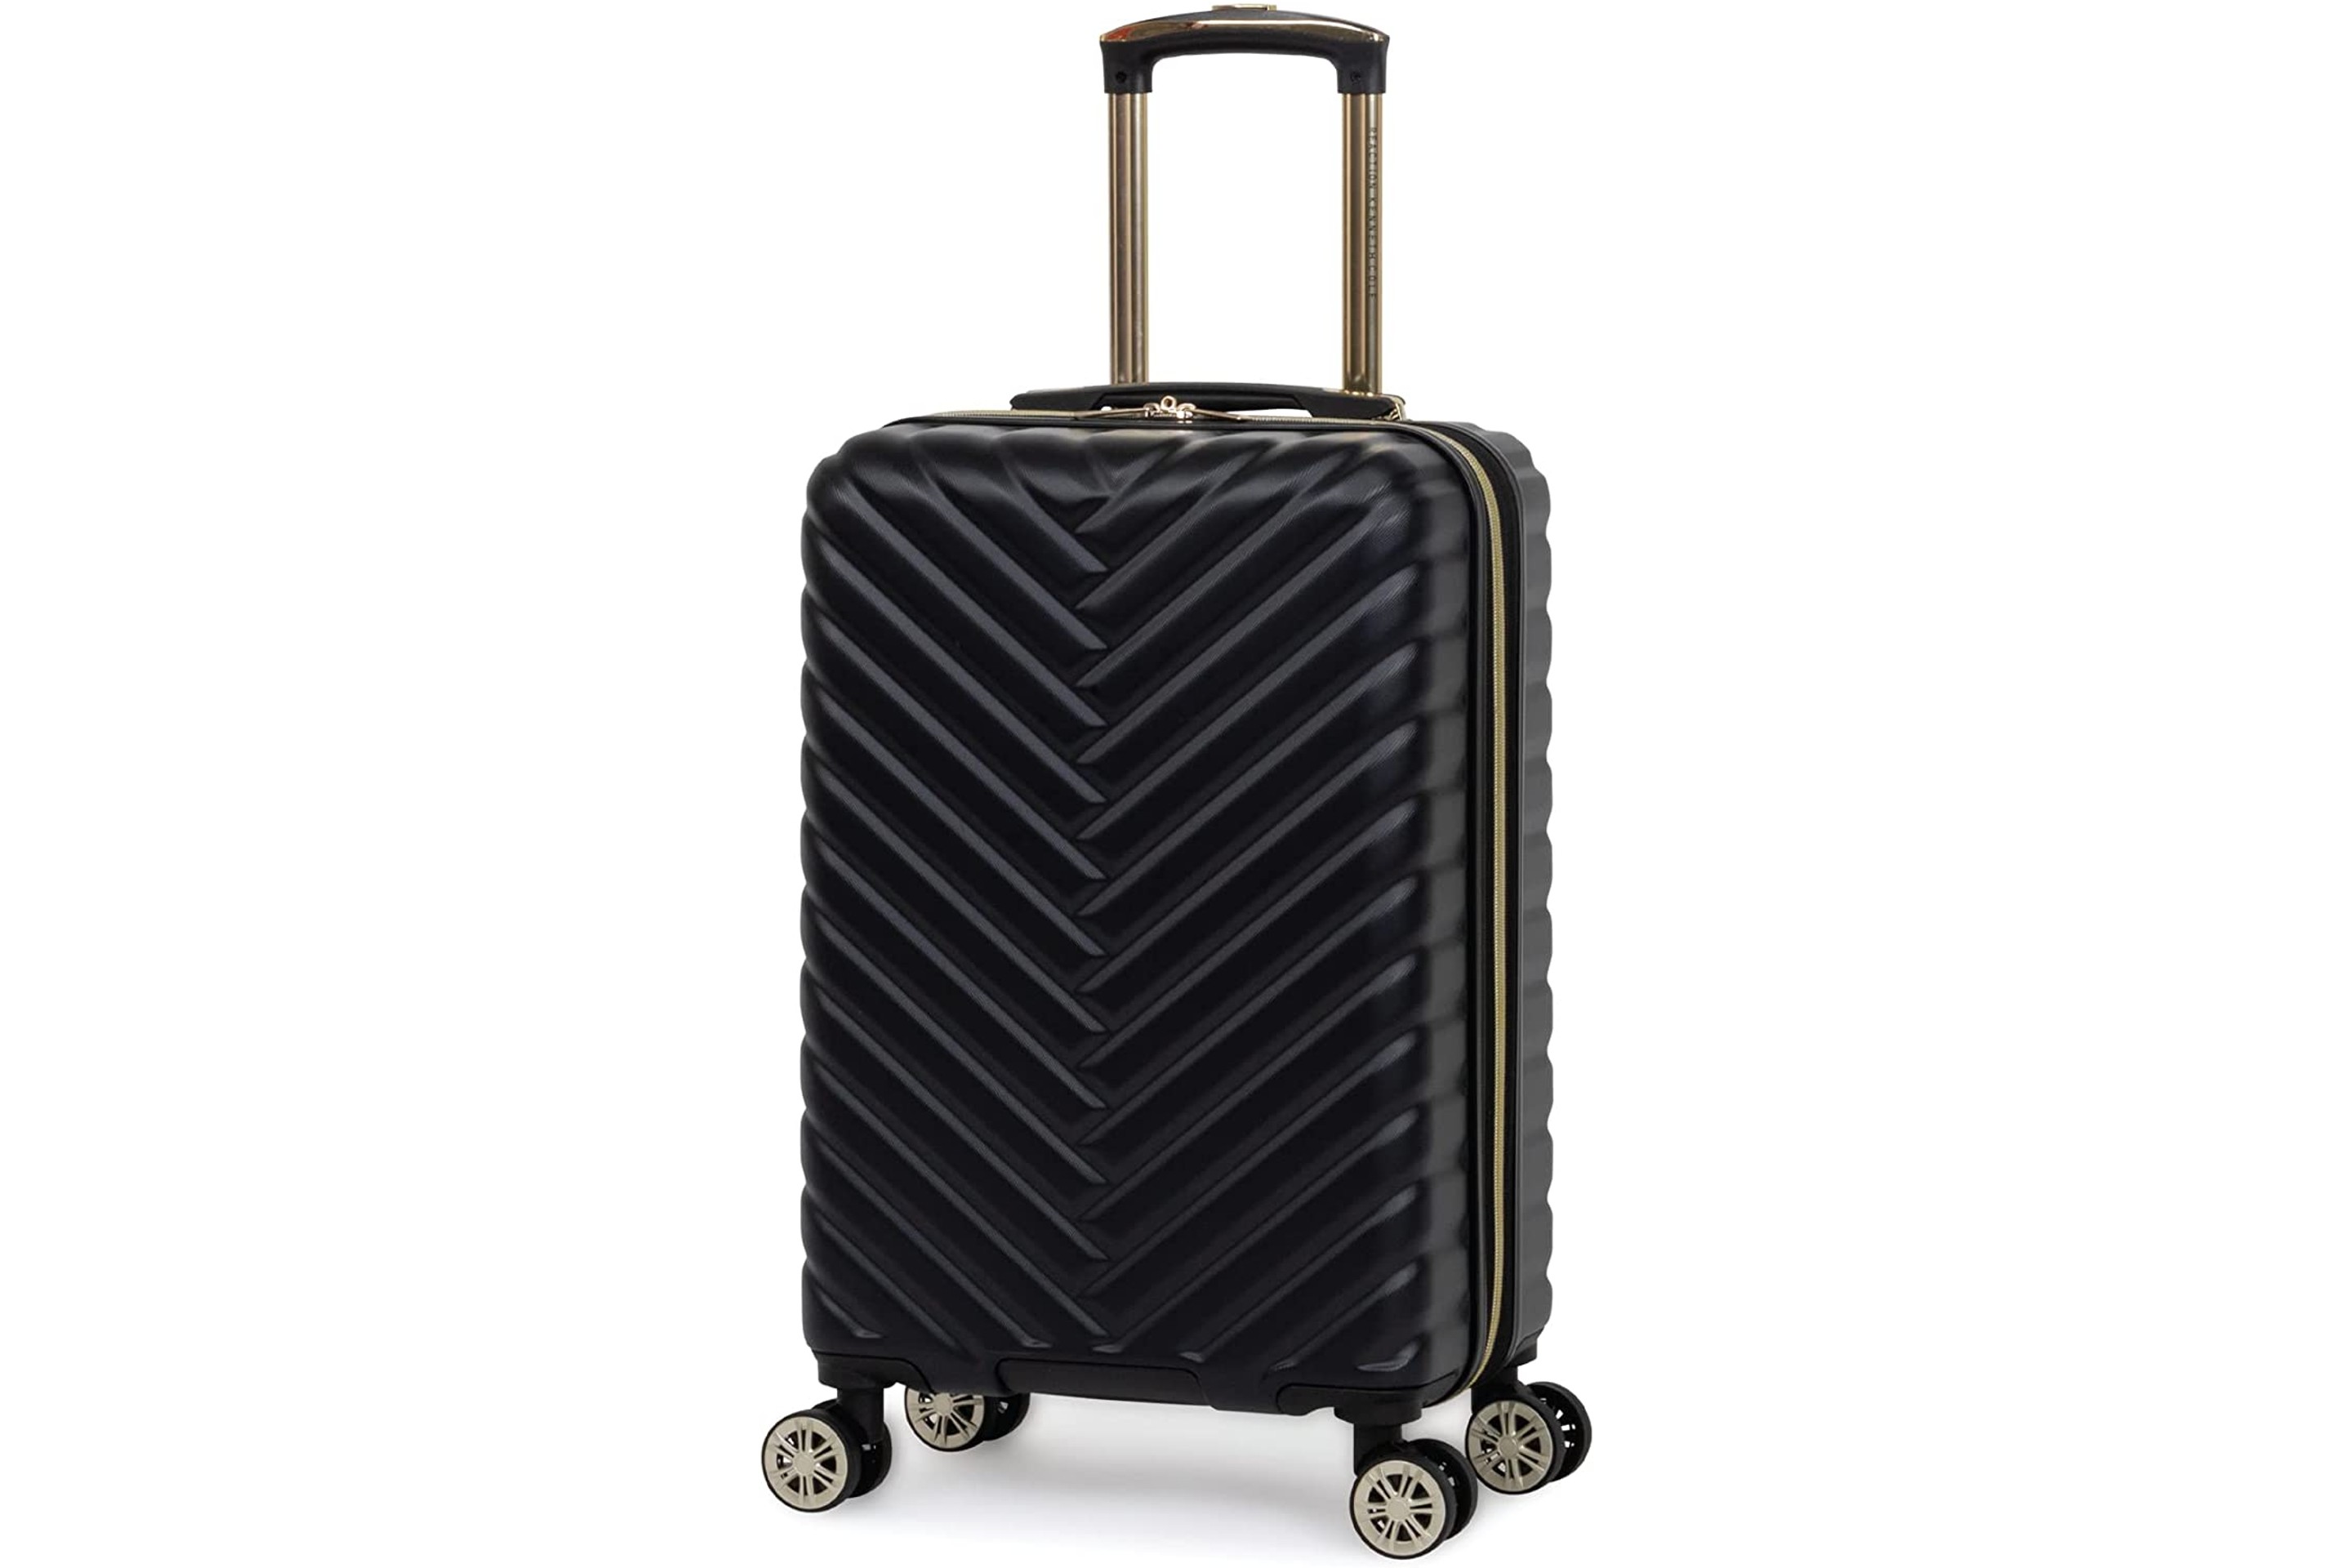 Kenneth Cole Reaction Chevron Expandable Luggage